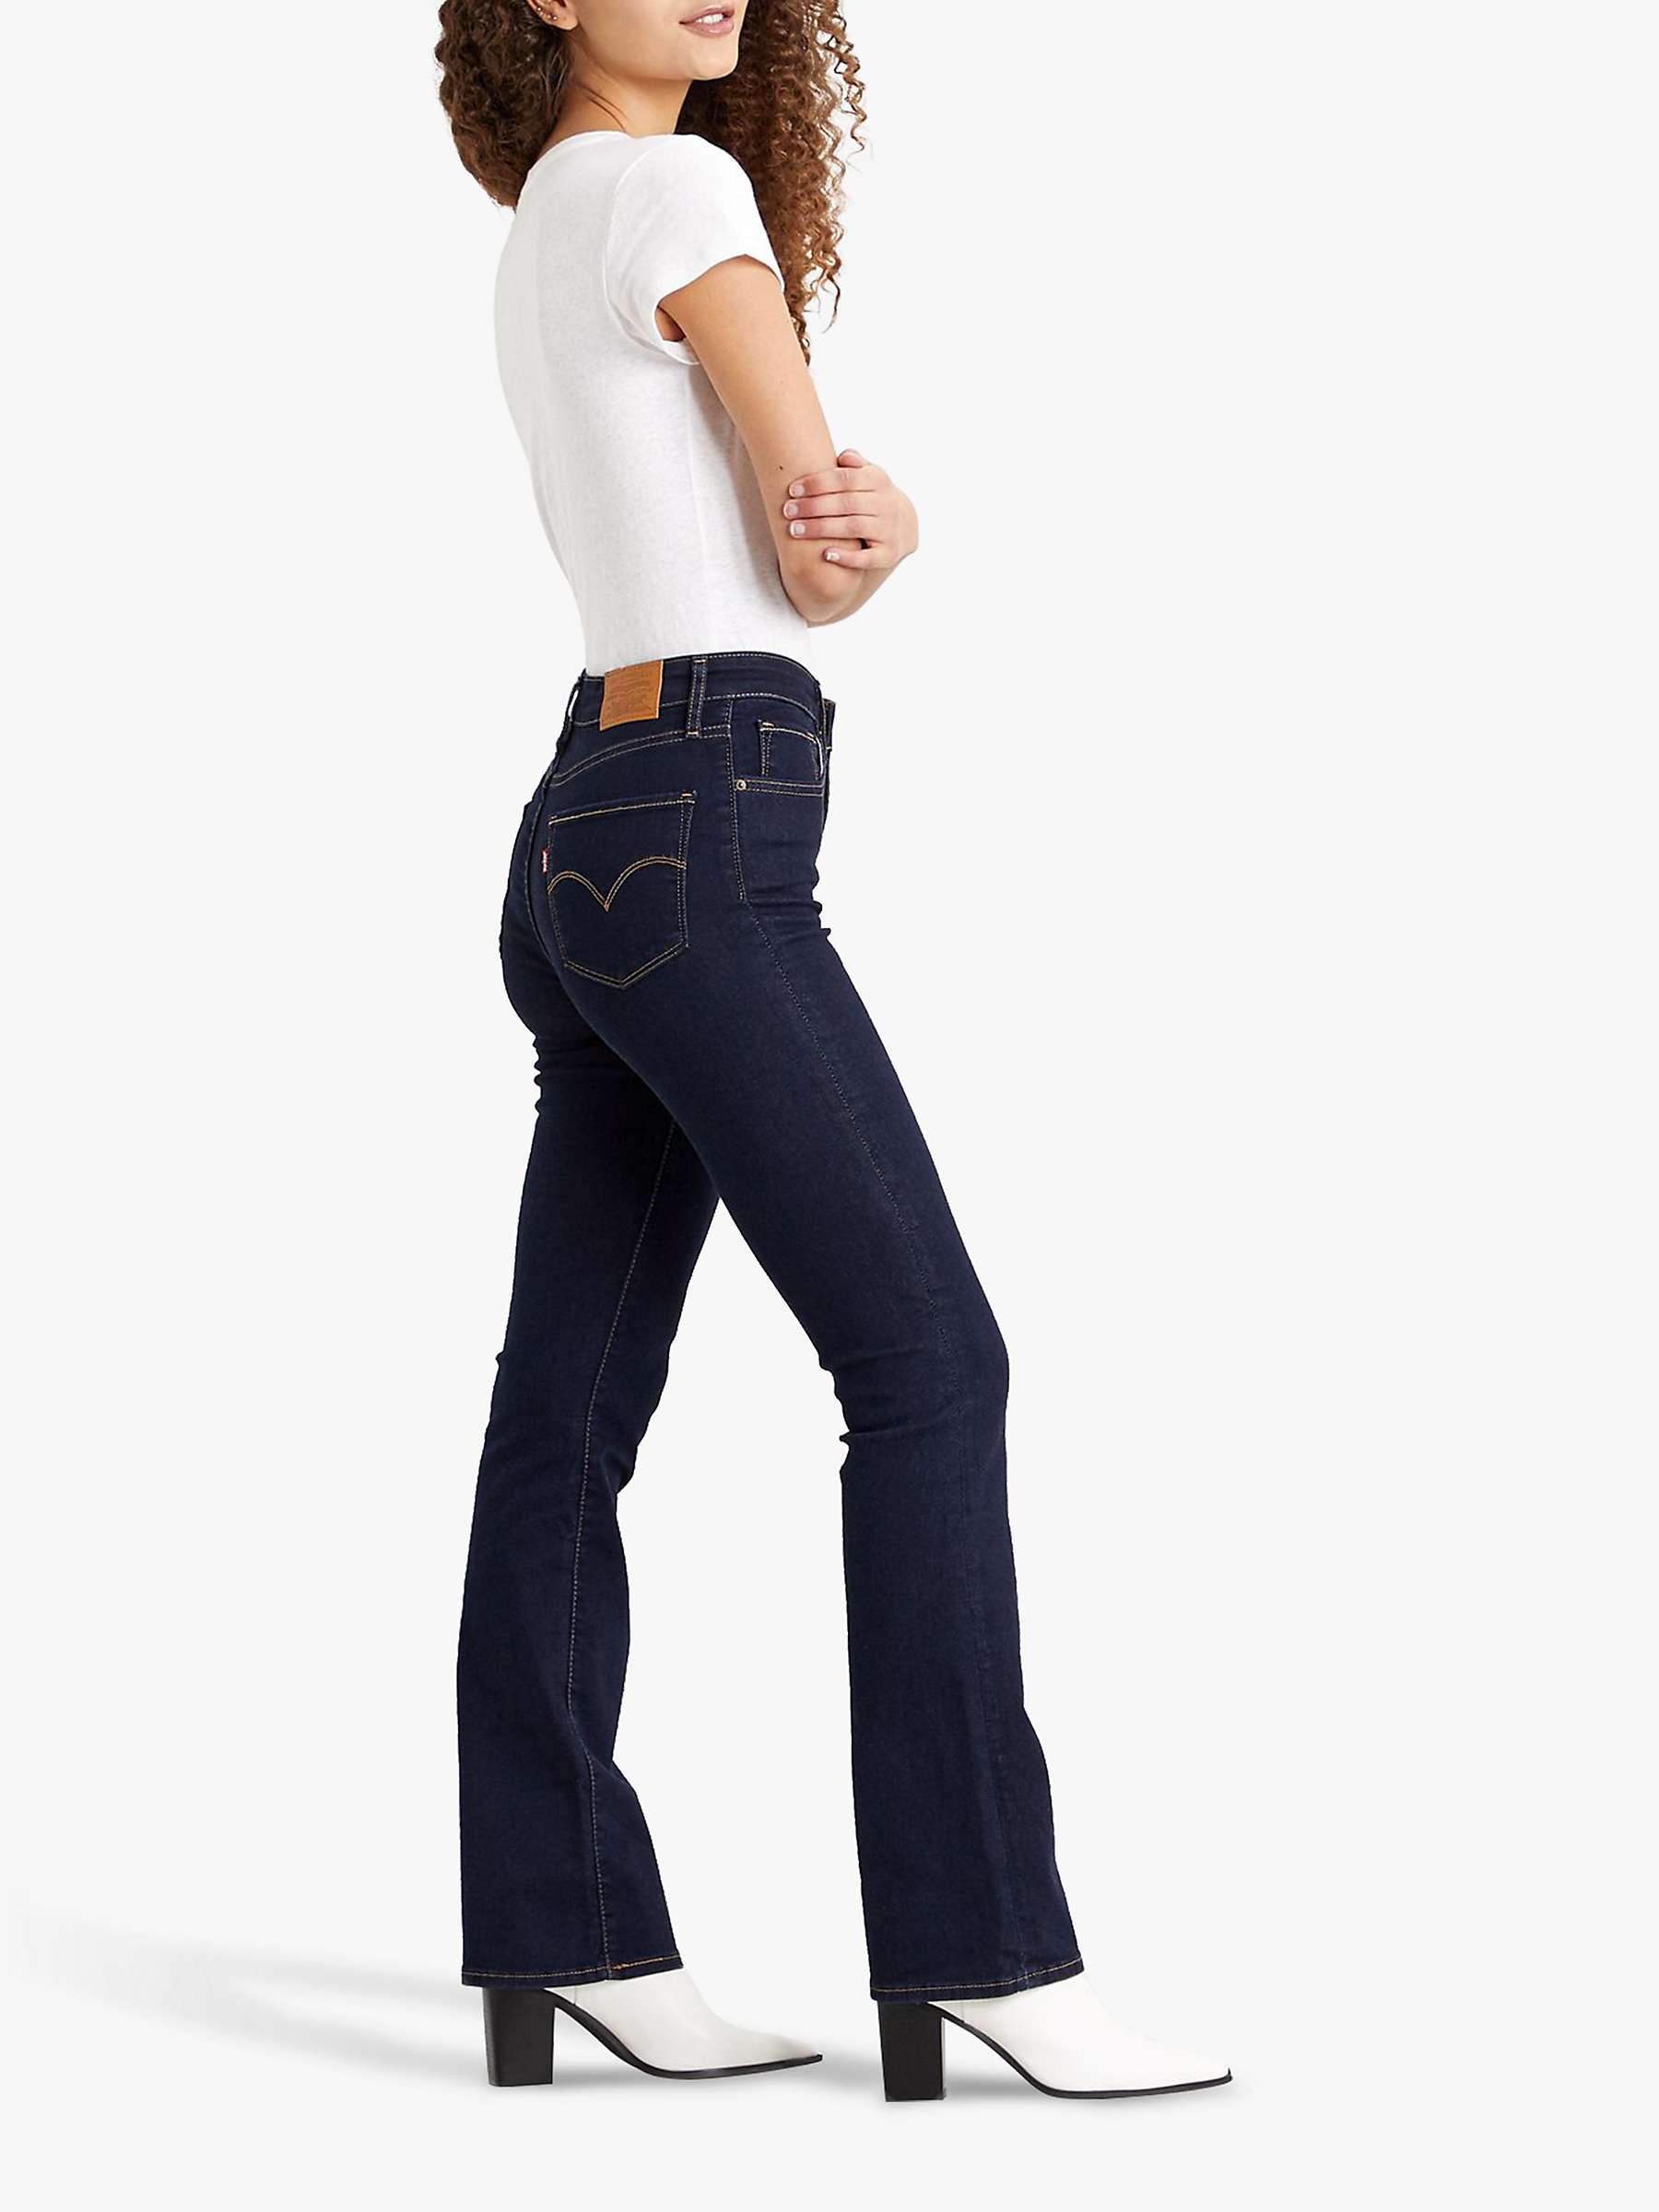 Buy Levi's 725 High Rise Boot Cut Jeans, To The Nine Online at johnlewis.com